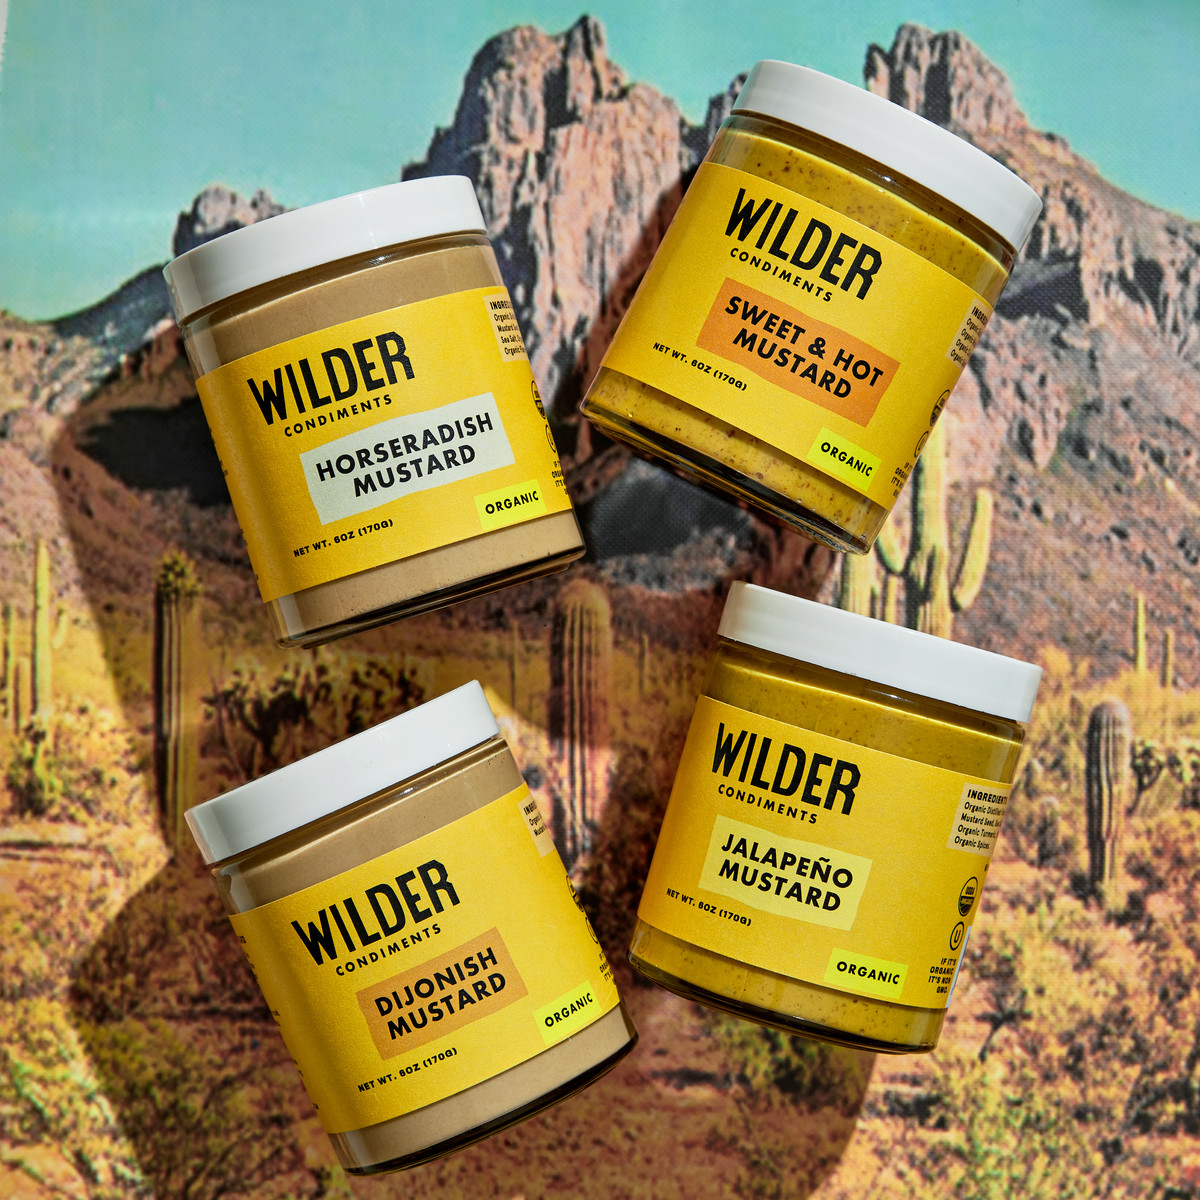 Wilder mustards in four bold and exciting flavors: Dijonish Mustard, Sweet & Hot Mustard, Jalapeño Mustard, and a new Horseradish Mustard.